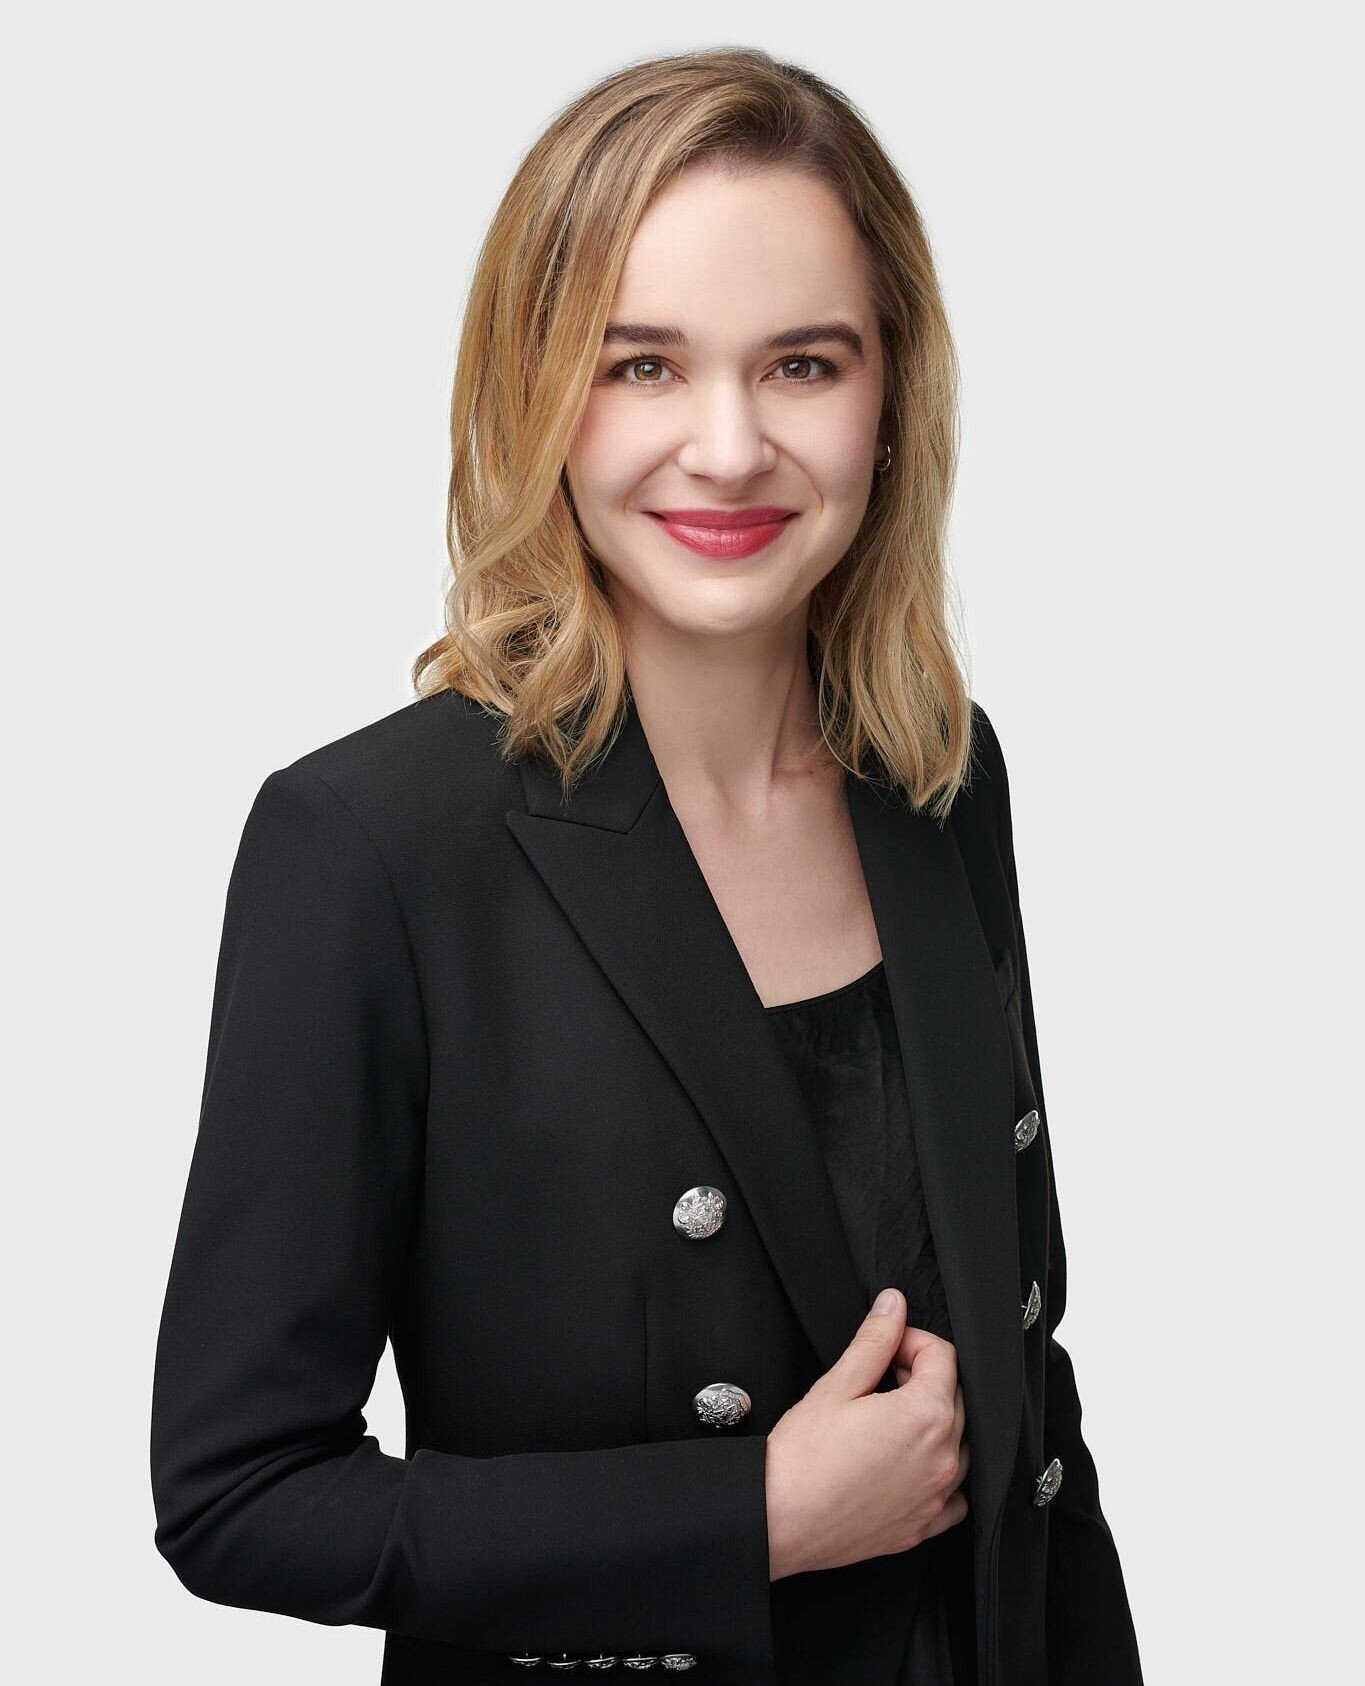 🎩 The classic look for business headshots: you can&rsquo;t go wrong with a black blazer. Make sure you choose a well-fitting blazer that accentuates your body shape, as this will be the key item to this look. ⁠
⁠
🙌 Styling the blazer with matching 